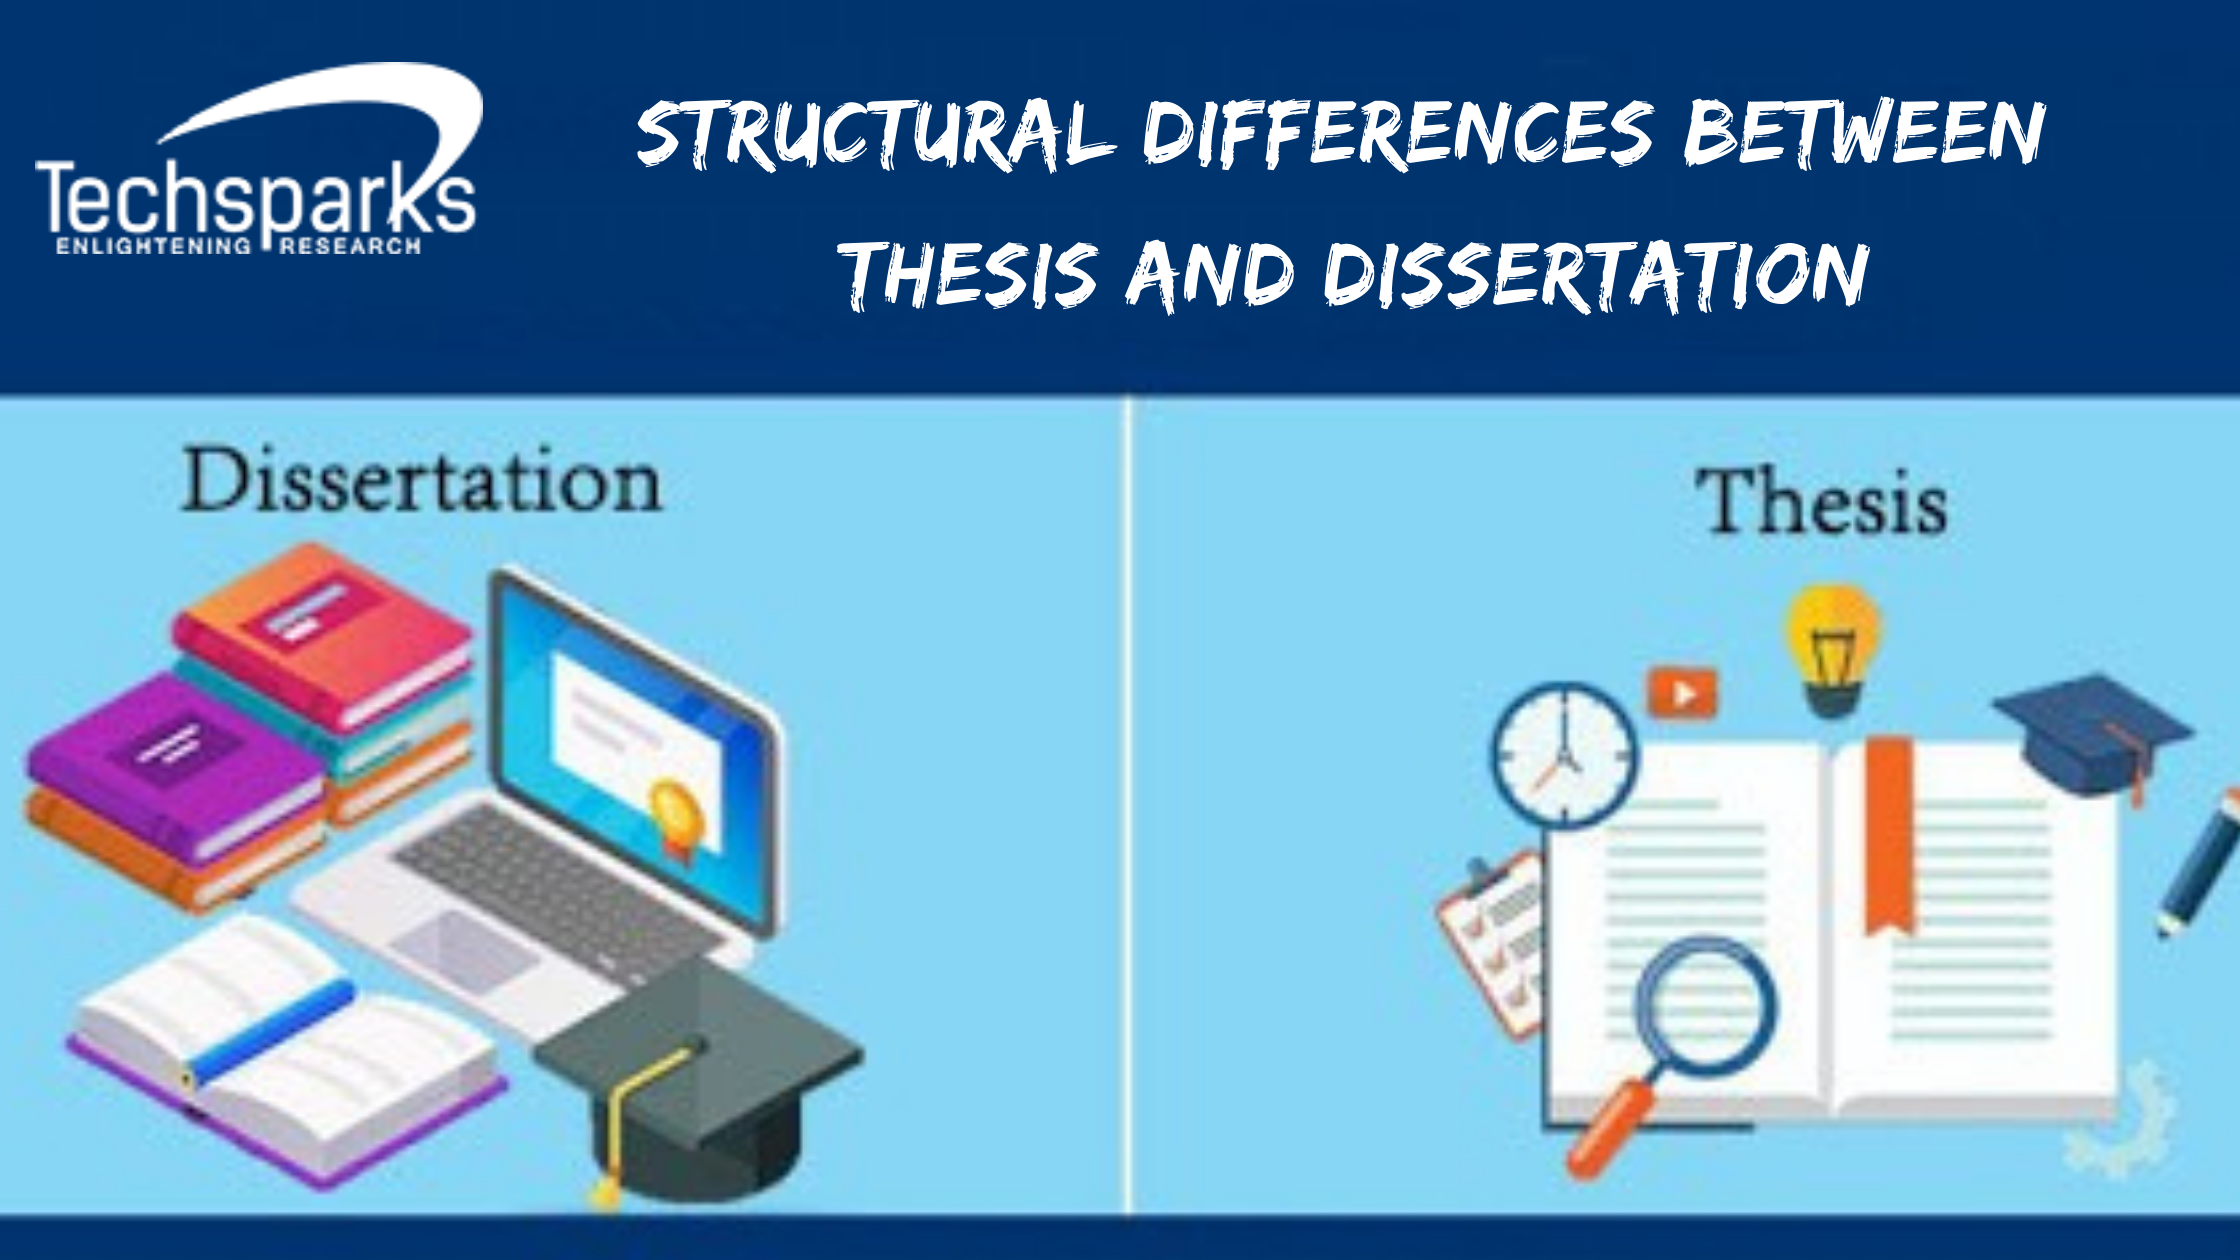 how different dissertation and thesis